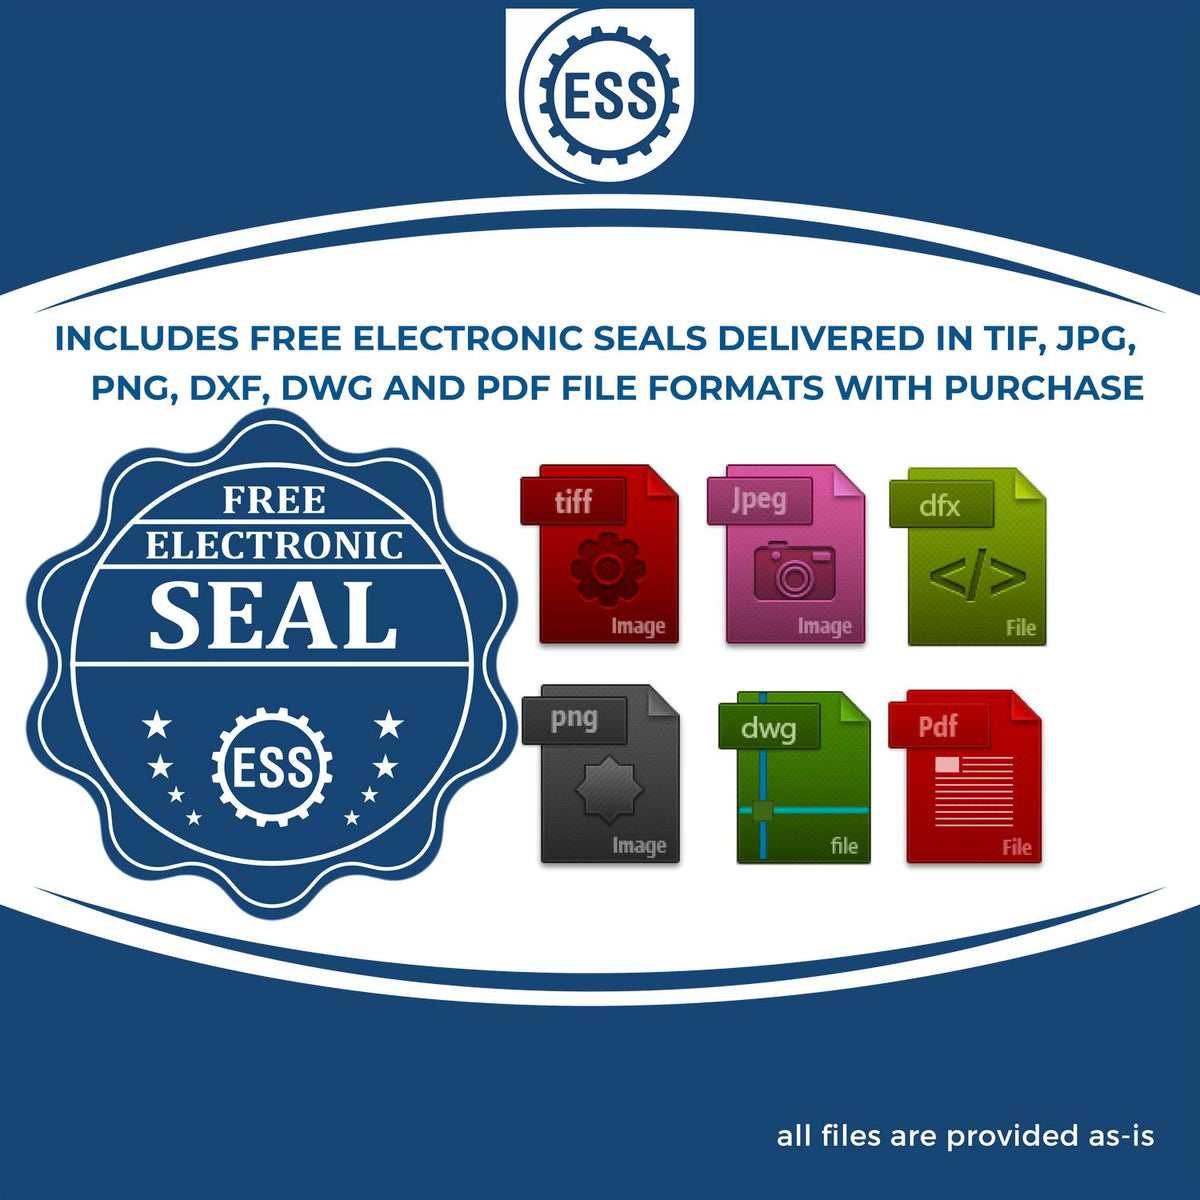 An infographic for the free electronic seal for the Self-Inking Rectangular Washington Notary Stamp illustrating the different file type icons such as DXF, DWG, TIF, JPG and PNG.